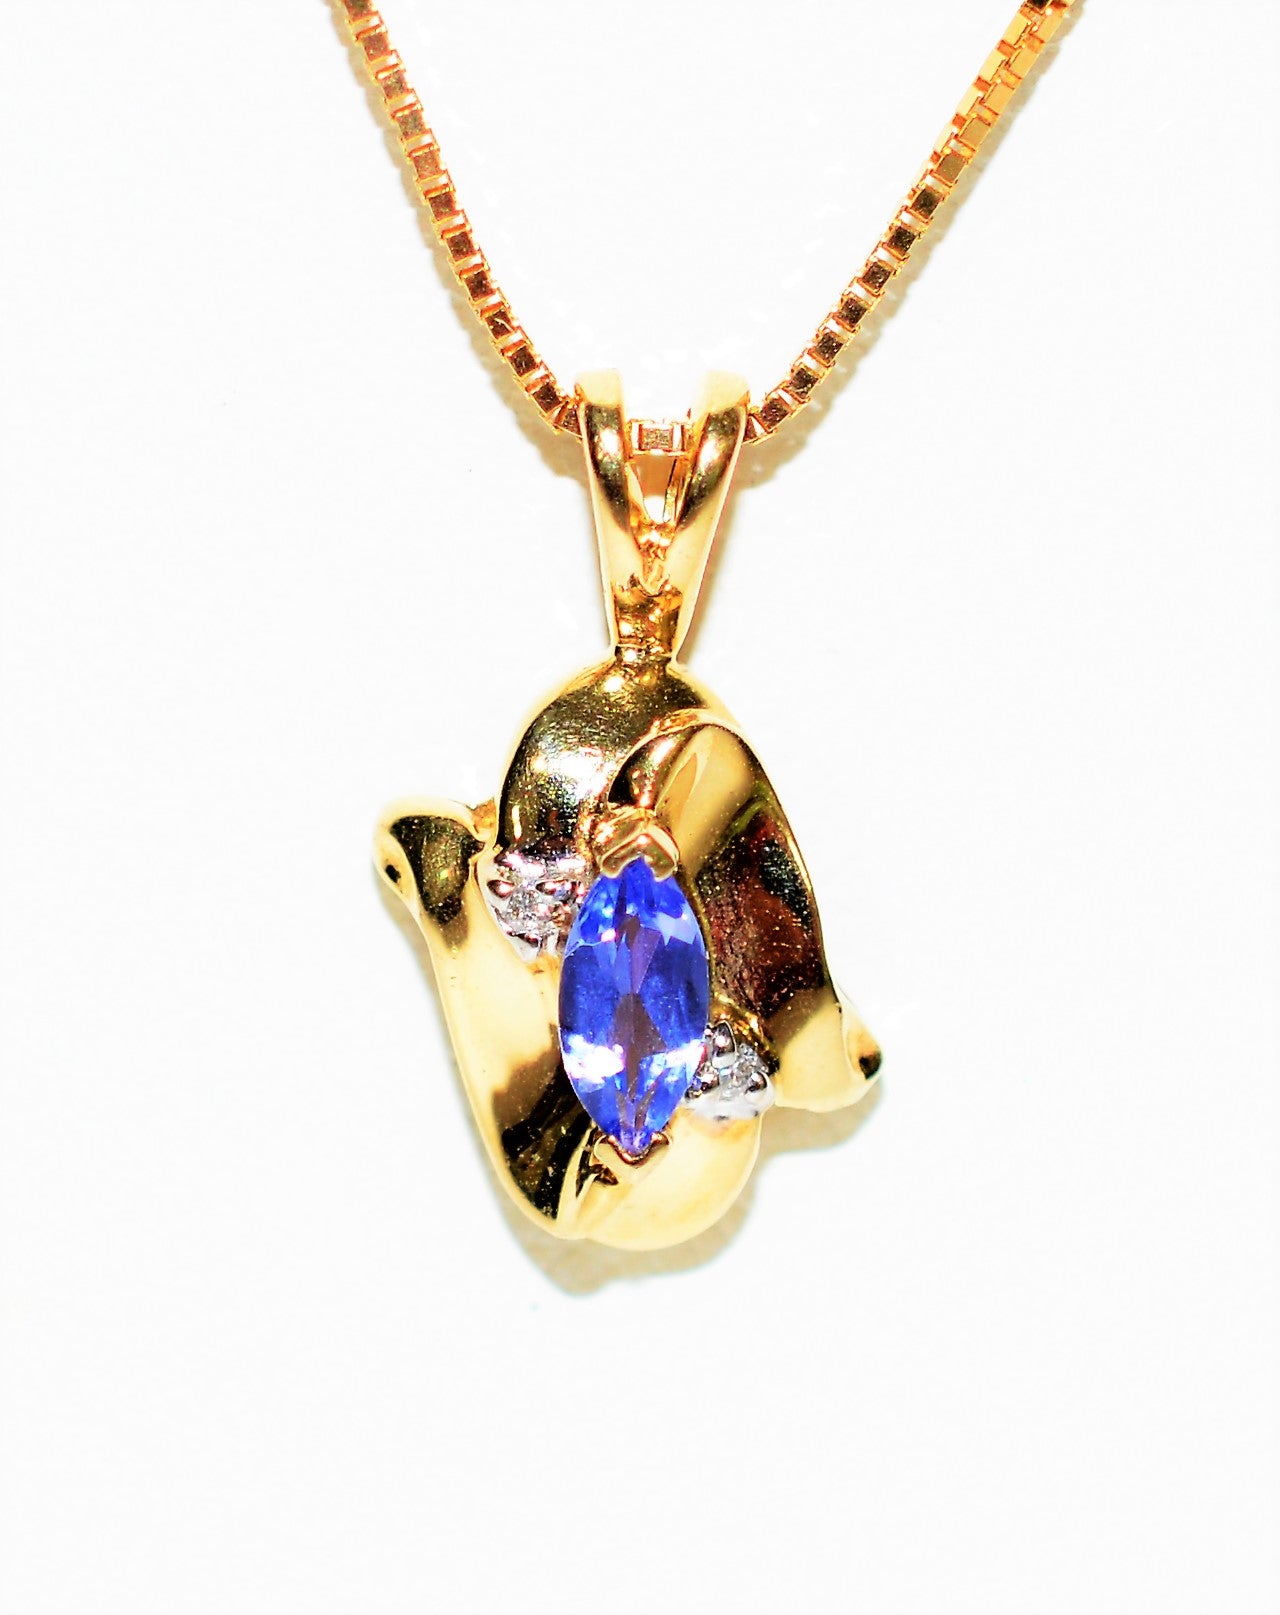 Natural Tanzanite & Diamond Necklace 14K Solid Gold .23tcw Pendant Necklace Statement Necklace Fine Jewelry Birthstone Estate Necklace